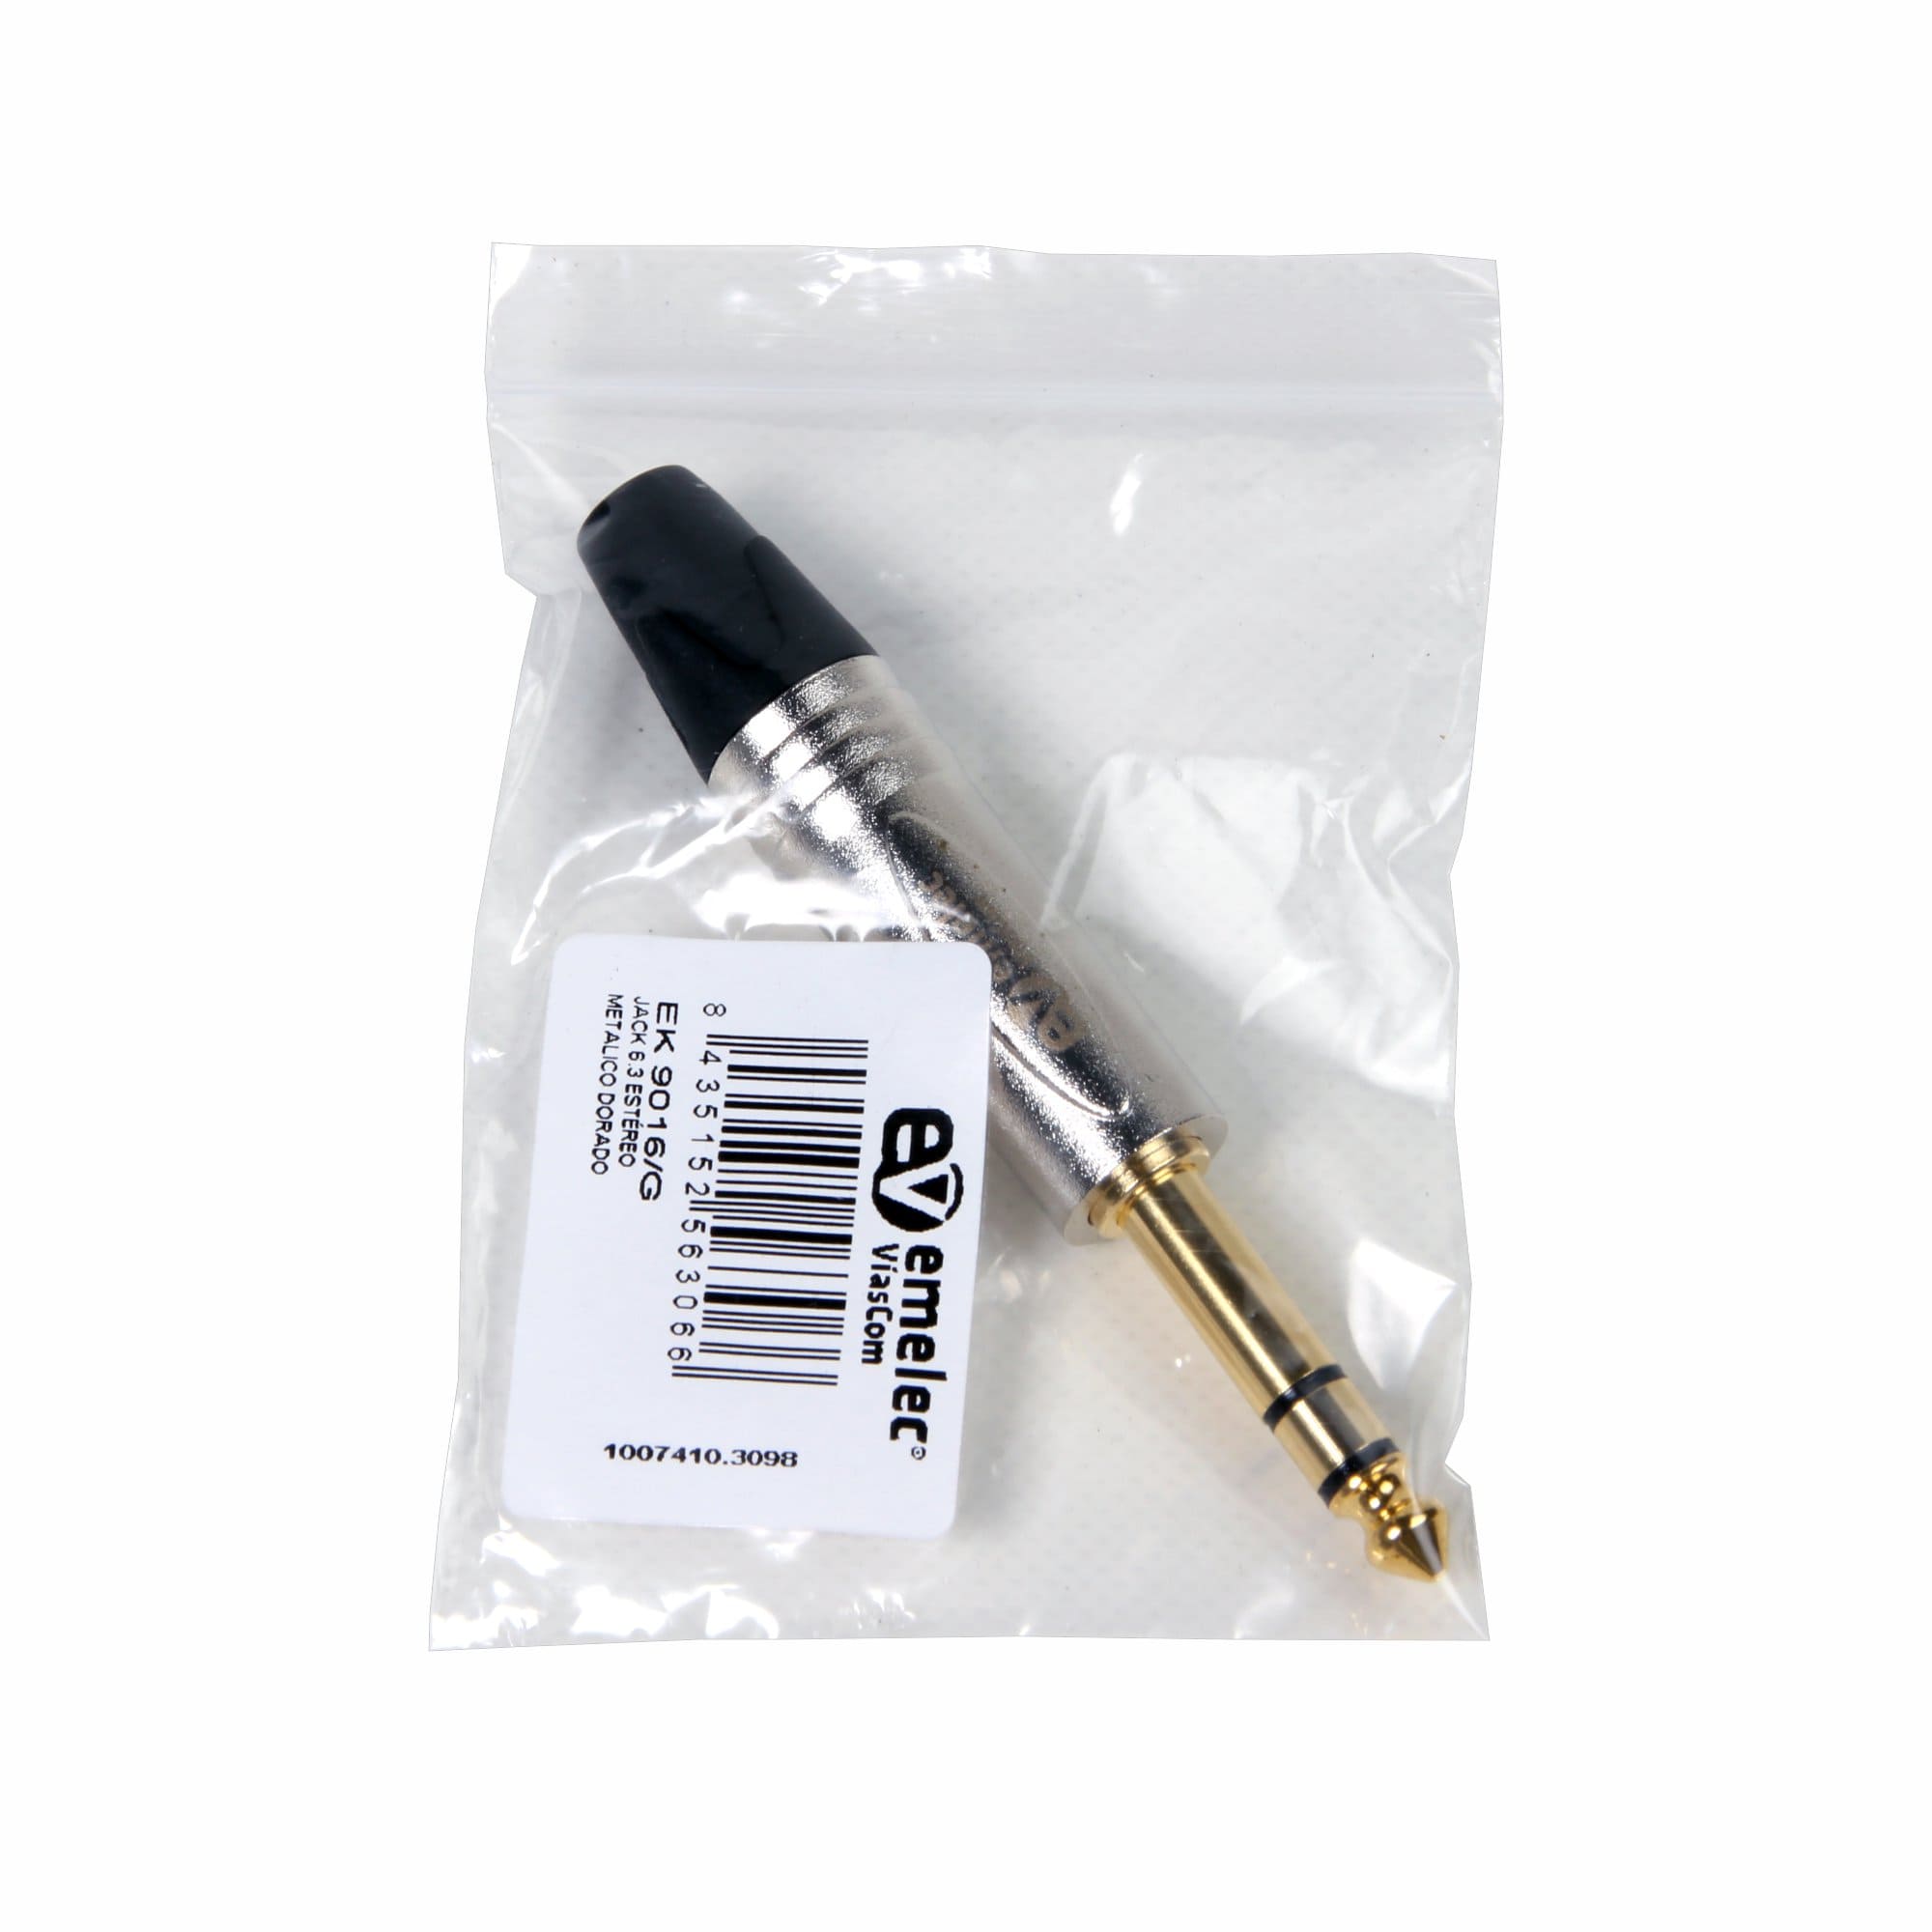 Individual plastic bag with gold-plated stereo Jack 6.3 male connector of Emelec VíasCom